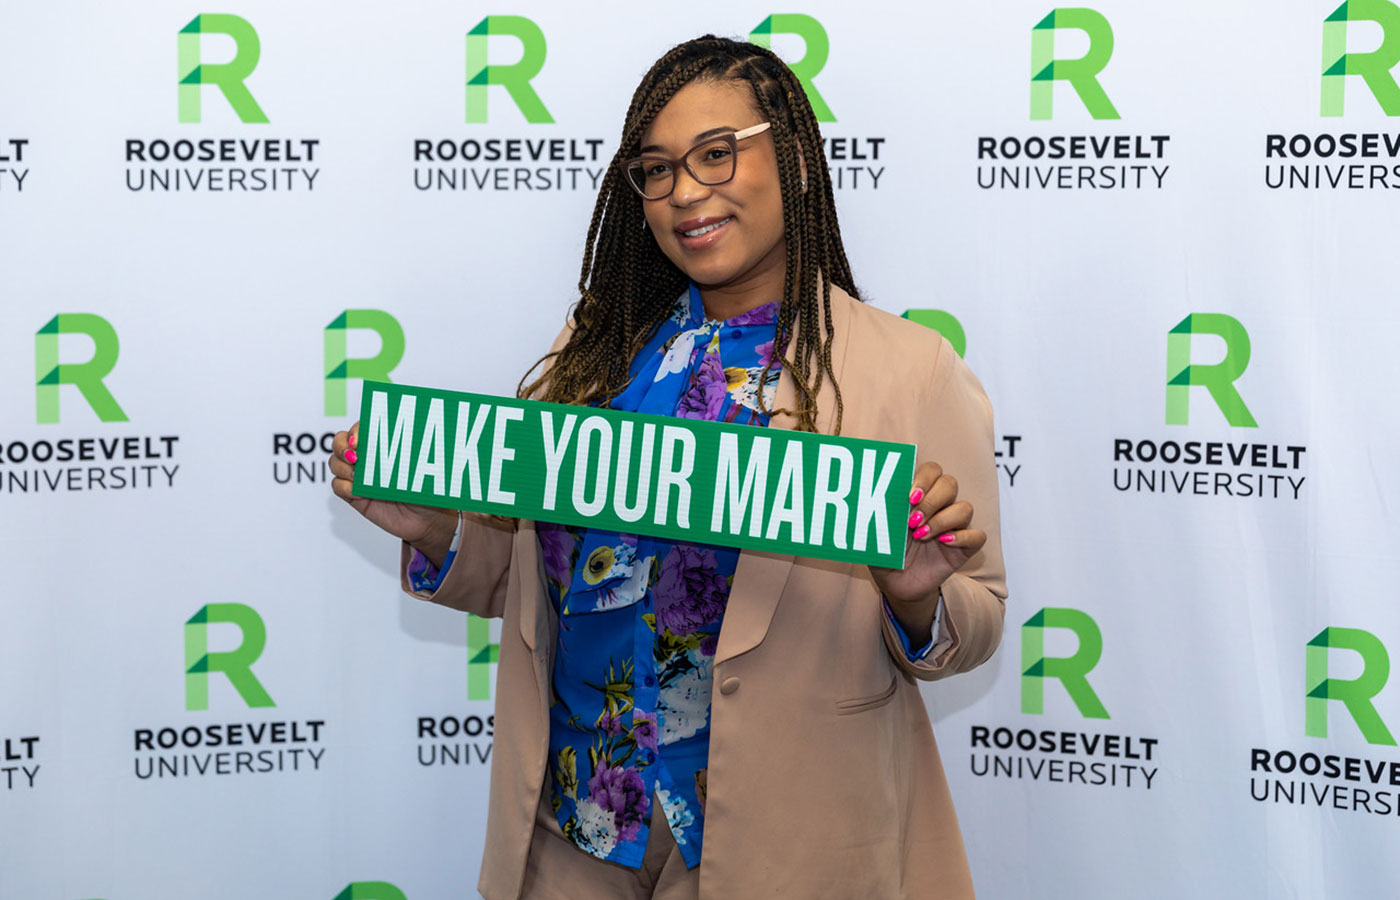 student holding "make your mark" sign in front of a Roosevelt University screen